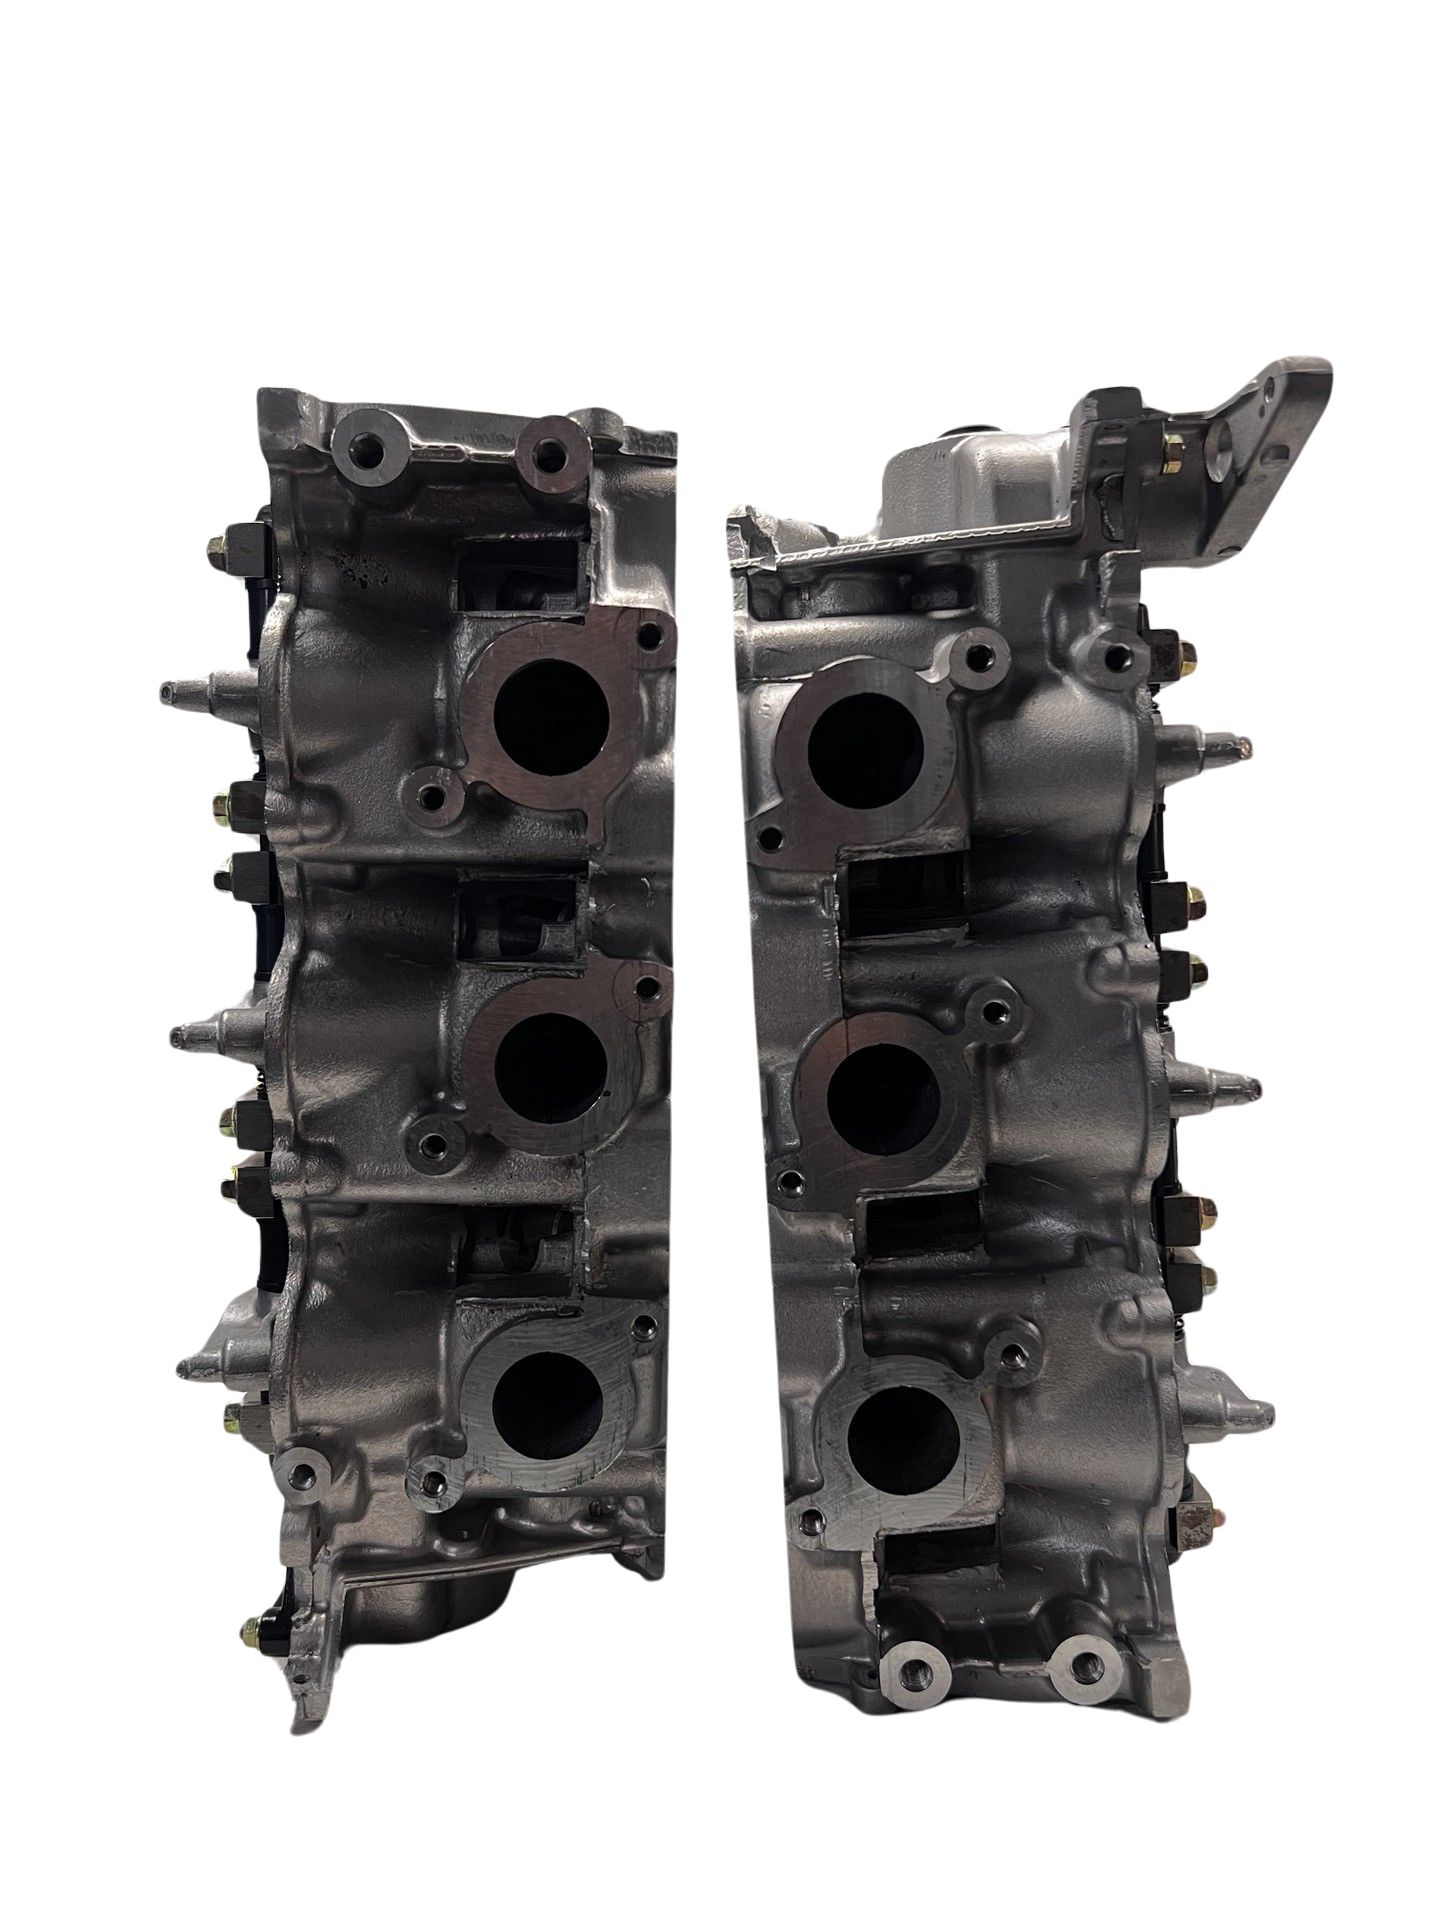 Exhaust side of cylinder head for a NEW Mazda 3.0L Casting #JE06 (SOLD IN PAIR)